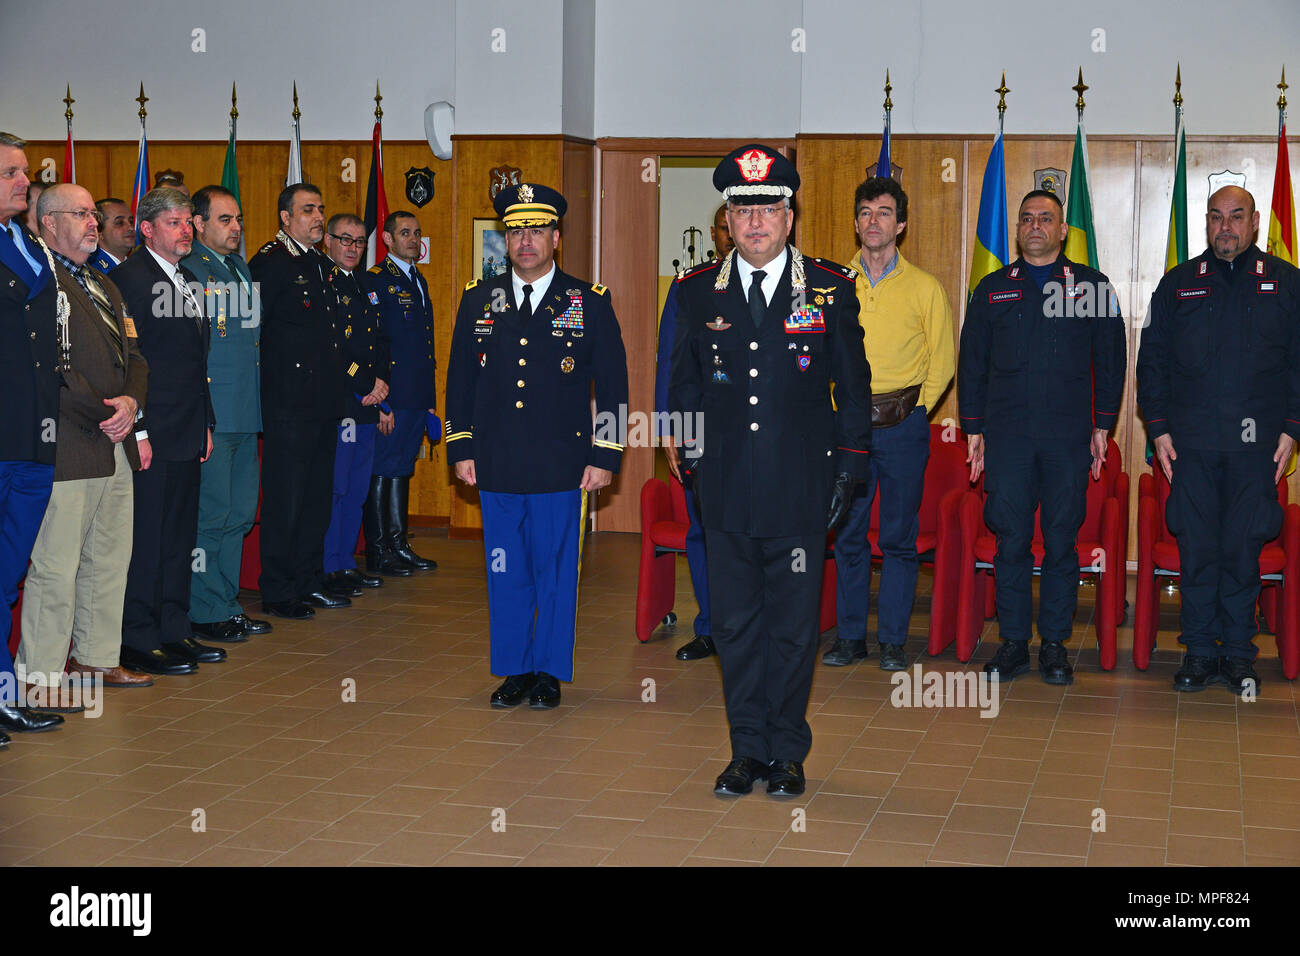 Brig. Gen. Giovanni Pietro Barbano (right), Center of Excellence for Stability Police Units (CoESPU) director and U.S. Army Col. Darius S. Gallegos (left), CoESPU deputy director, stand at attention during the graduation ceremony of 14th Protection of Civilians Course at the CoESPU in Vicenza, Italy, February 21, 2017. (U.S. Army Photo by Visual Information Specialist Paolo Bovo/released) Stock Photo